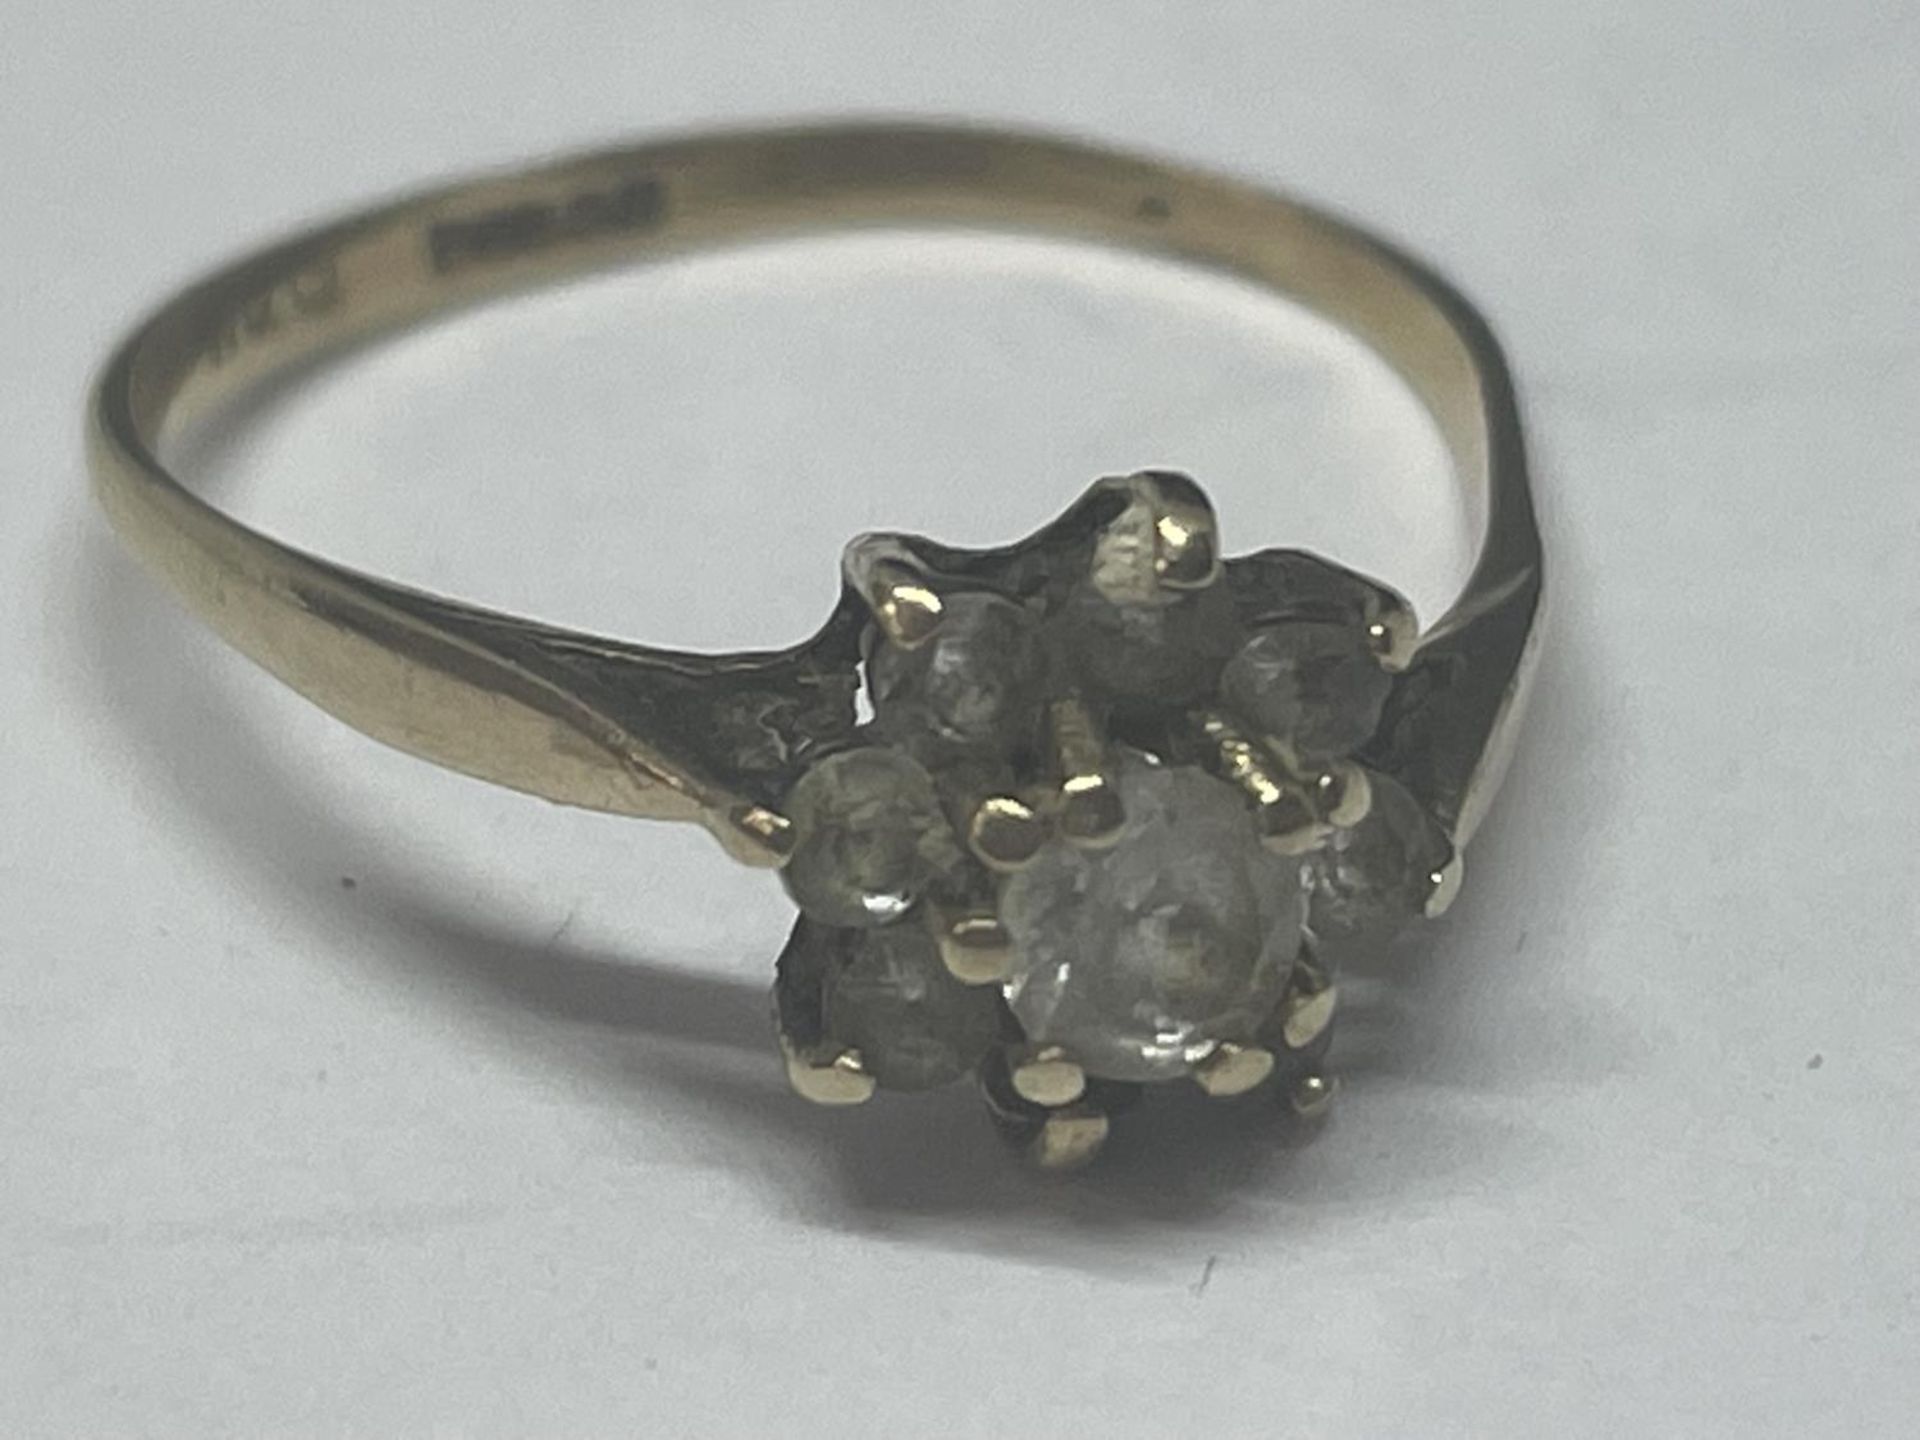 A 9 CARAT GOLD RING WITH CLEAR STONES IN A FLOWER DESIGN SIZE M/N GROSS WEIGHT 1.24 GRAMS